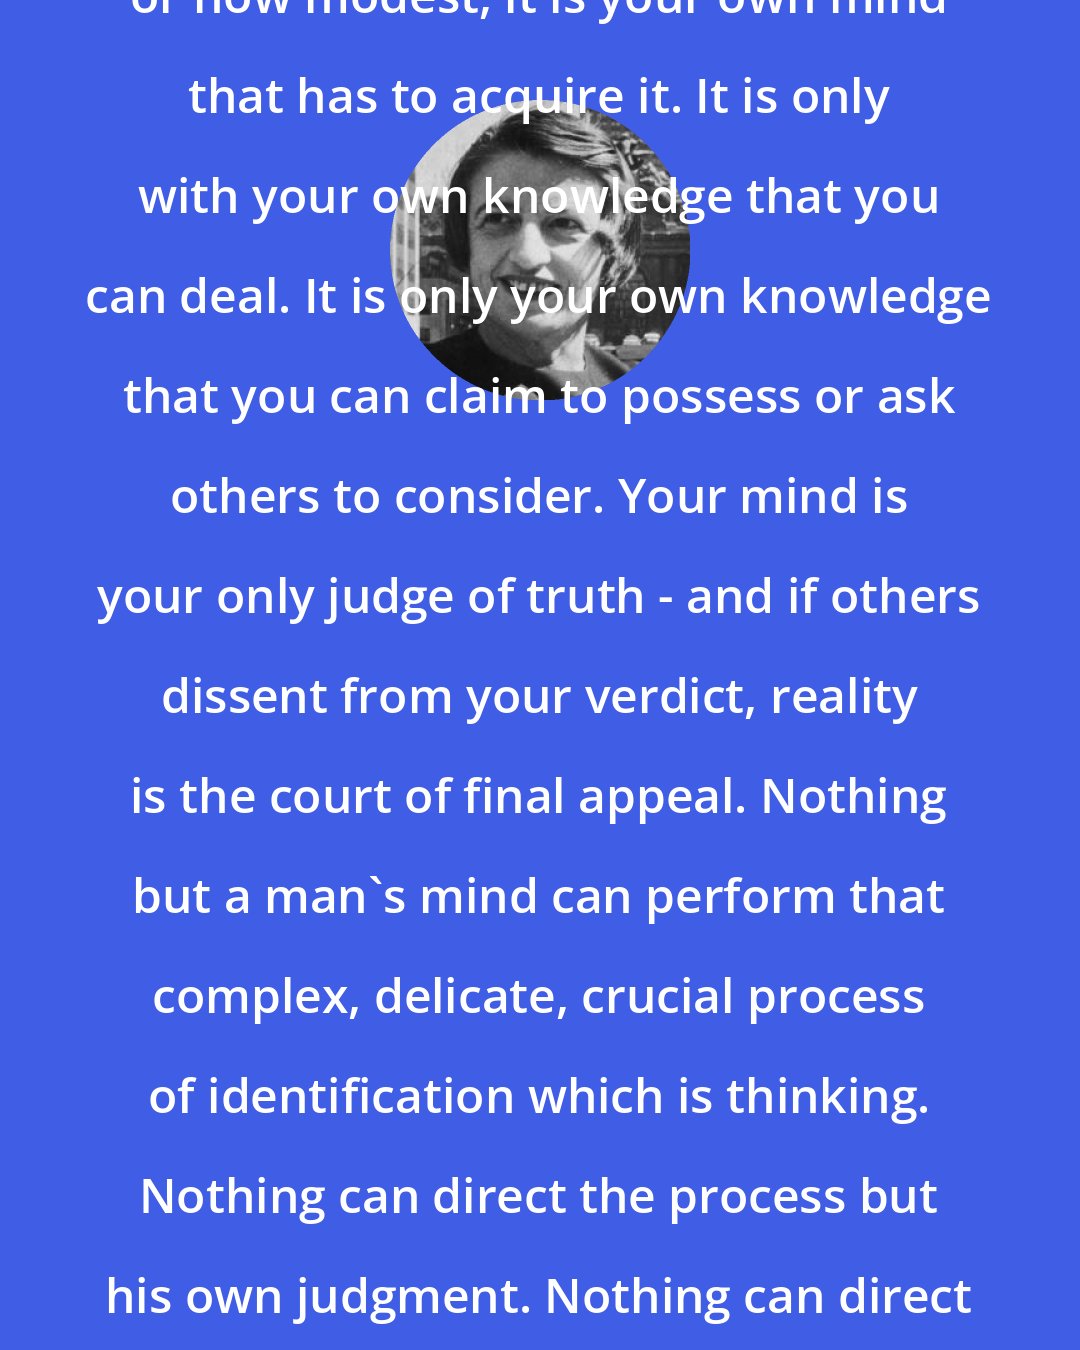 Ayn Rand: No matter how vast your knowledge or how modest, it is your own mind that has to acquire it. It is only with your own knowledge that you can deal. It is only your own knowledge that you can claim to possess or ask others to consider. Your mind is your only judge of truth - and if others dissent from your verdict, reality is the court of final appeal. Nothing but a man's mind can perform that complex, delicate, crucial process of identification which is thinking. Nothing can direct the process but his own judgment. Nothing can direct his judgment but his moral integrity.